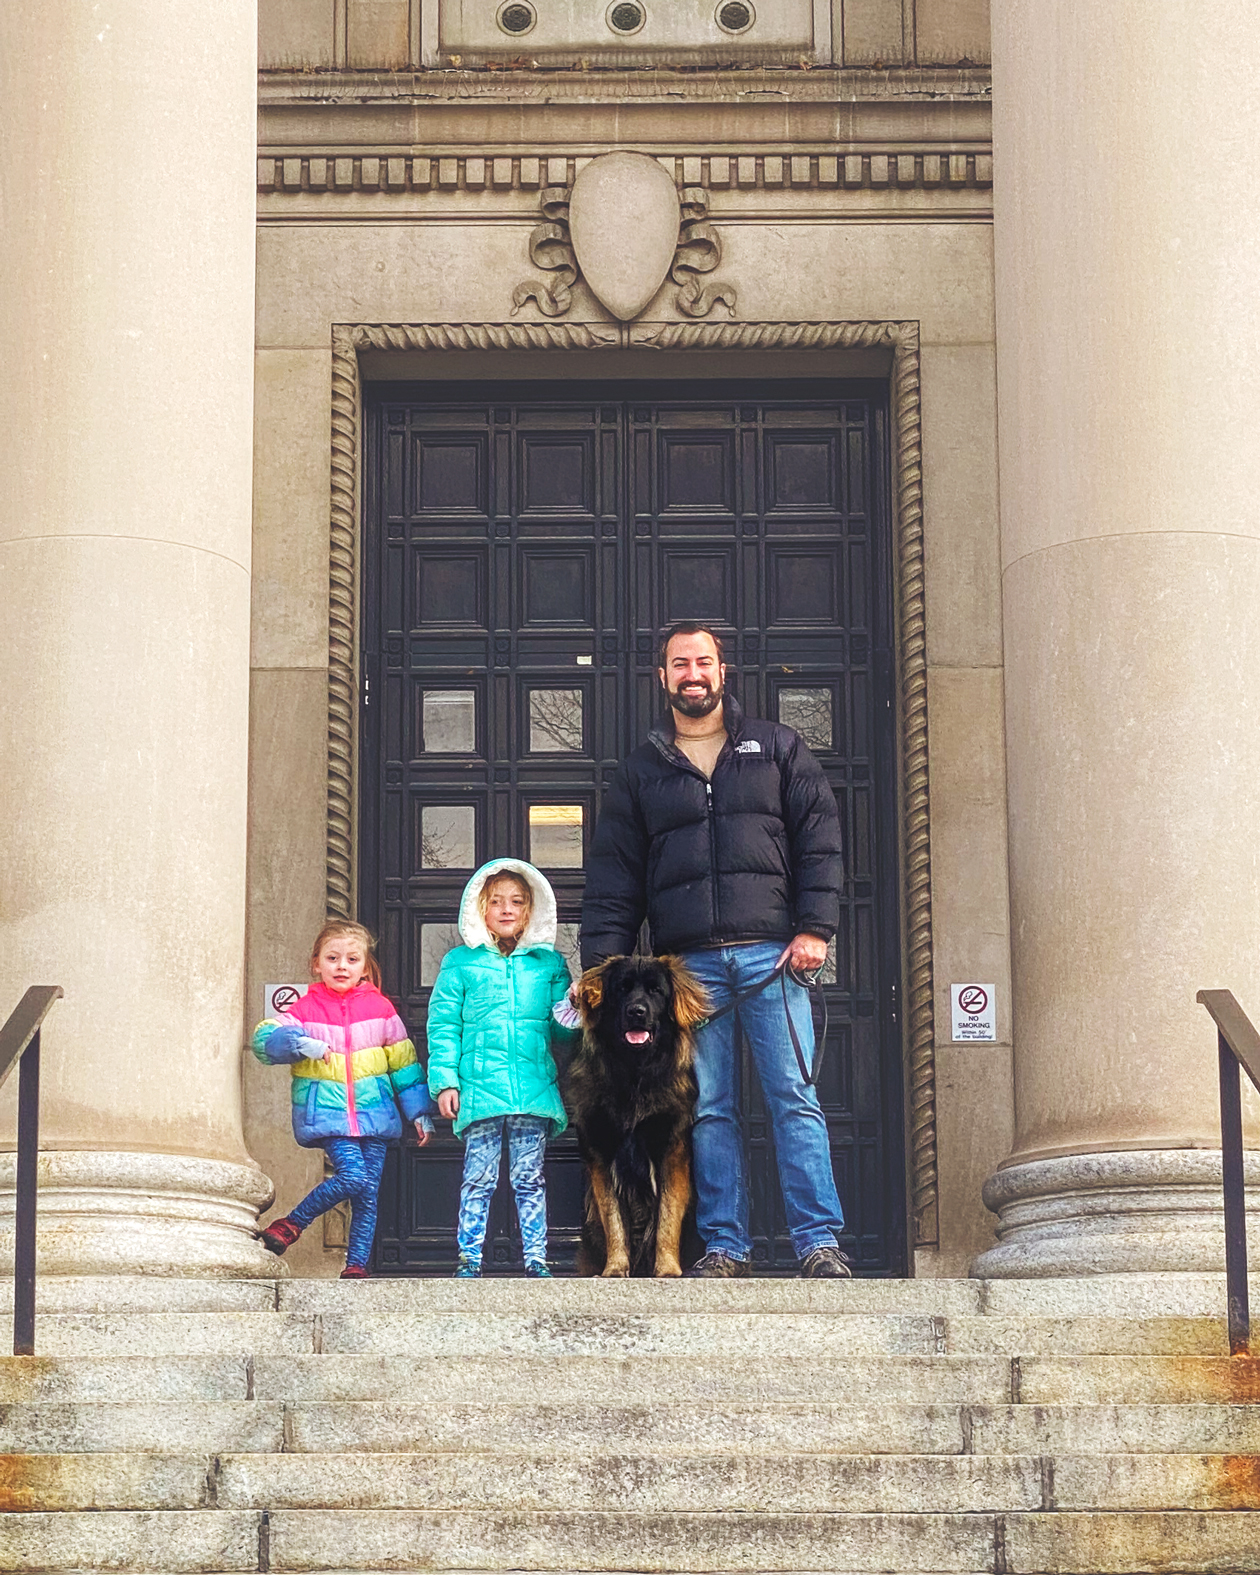 A man and two young girls stand with a dog on the steps of a large building